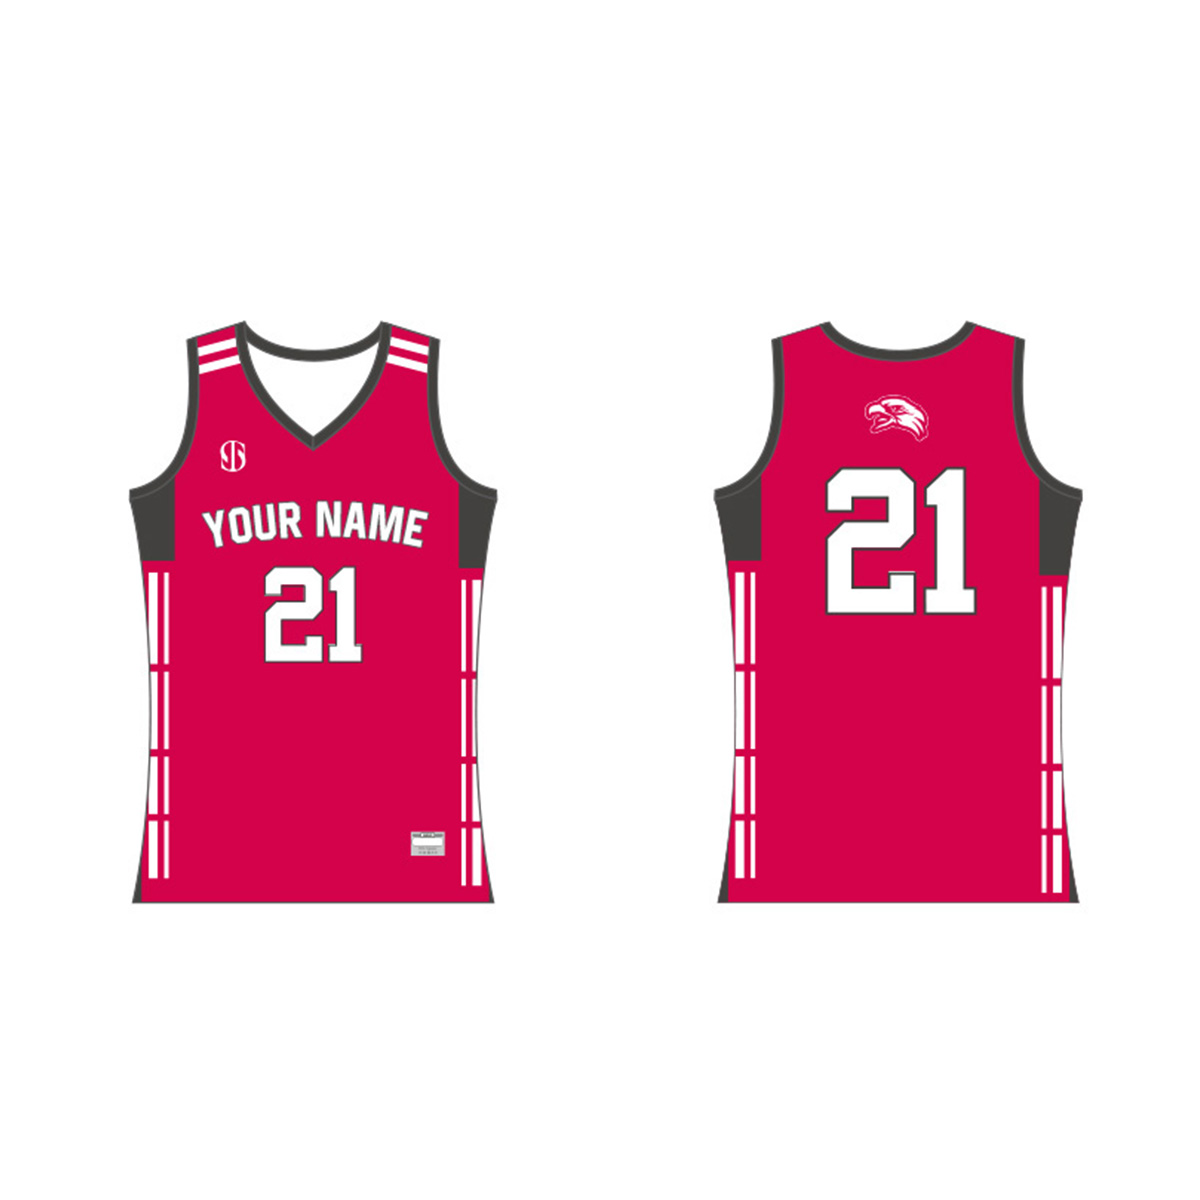 white and red reversible basketball uniforms - Stone Sports Wear